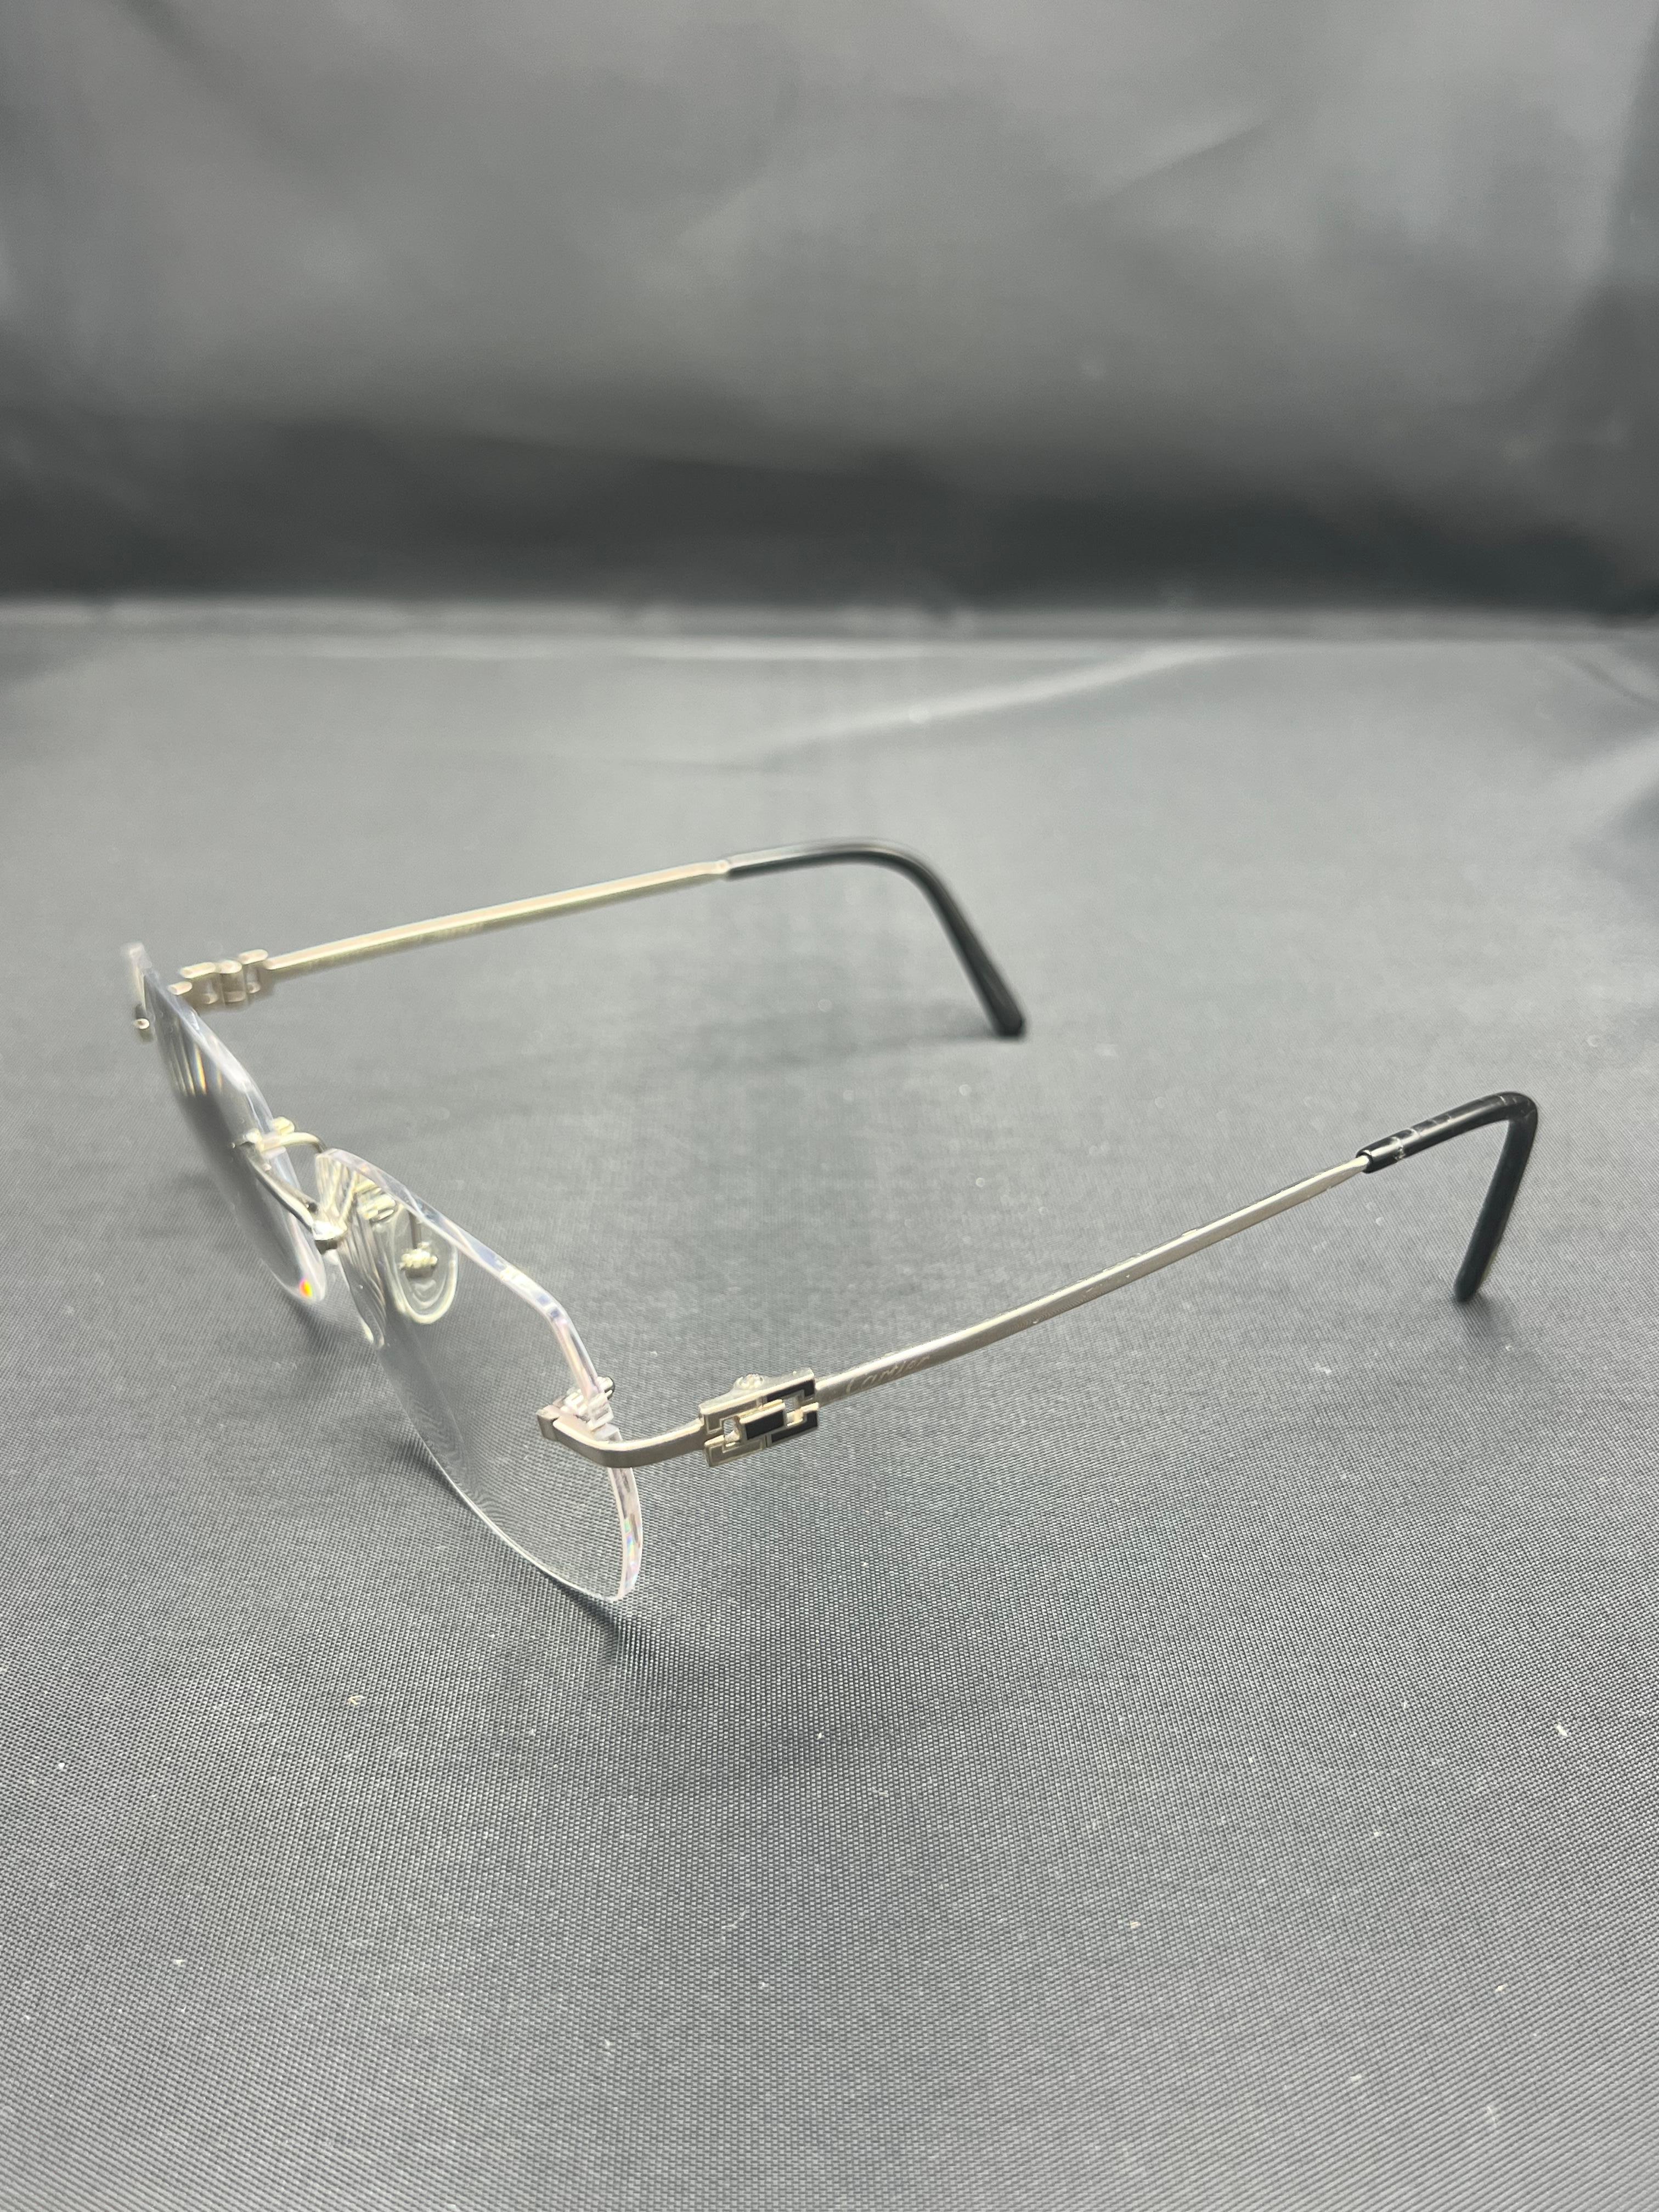 - 18k white gold
- Square shaped lenses
- Made in France
- Serial number 3885923
- Stamped with French marks (eagle head)
